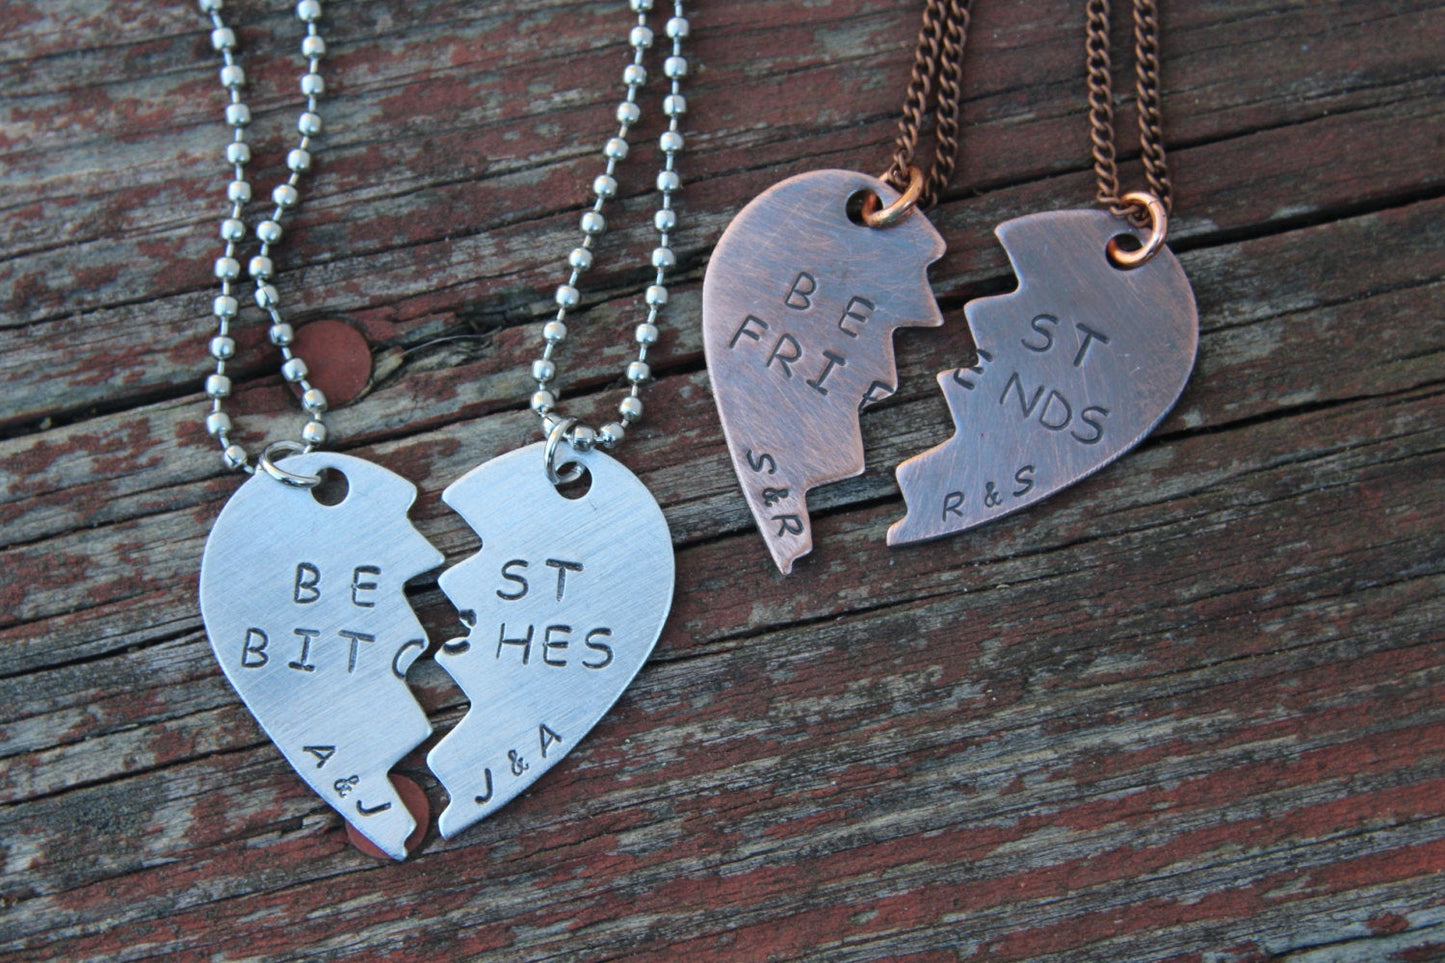 Best Friends Necklace-Best Bitches-Heart Jewelry-Christmas Gift for Friend-Gift for Besties-Personalized Friend Gift